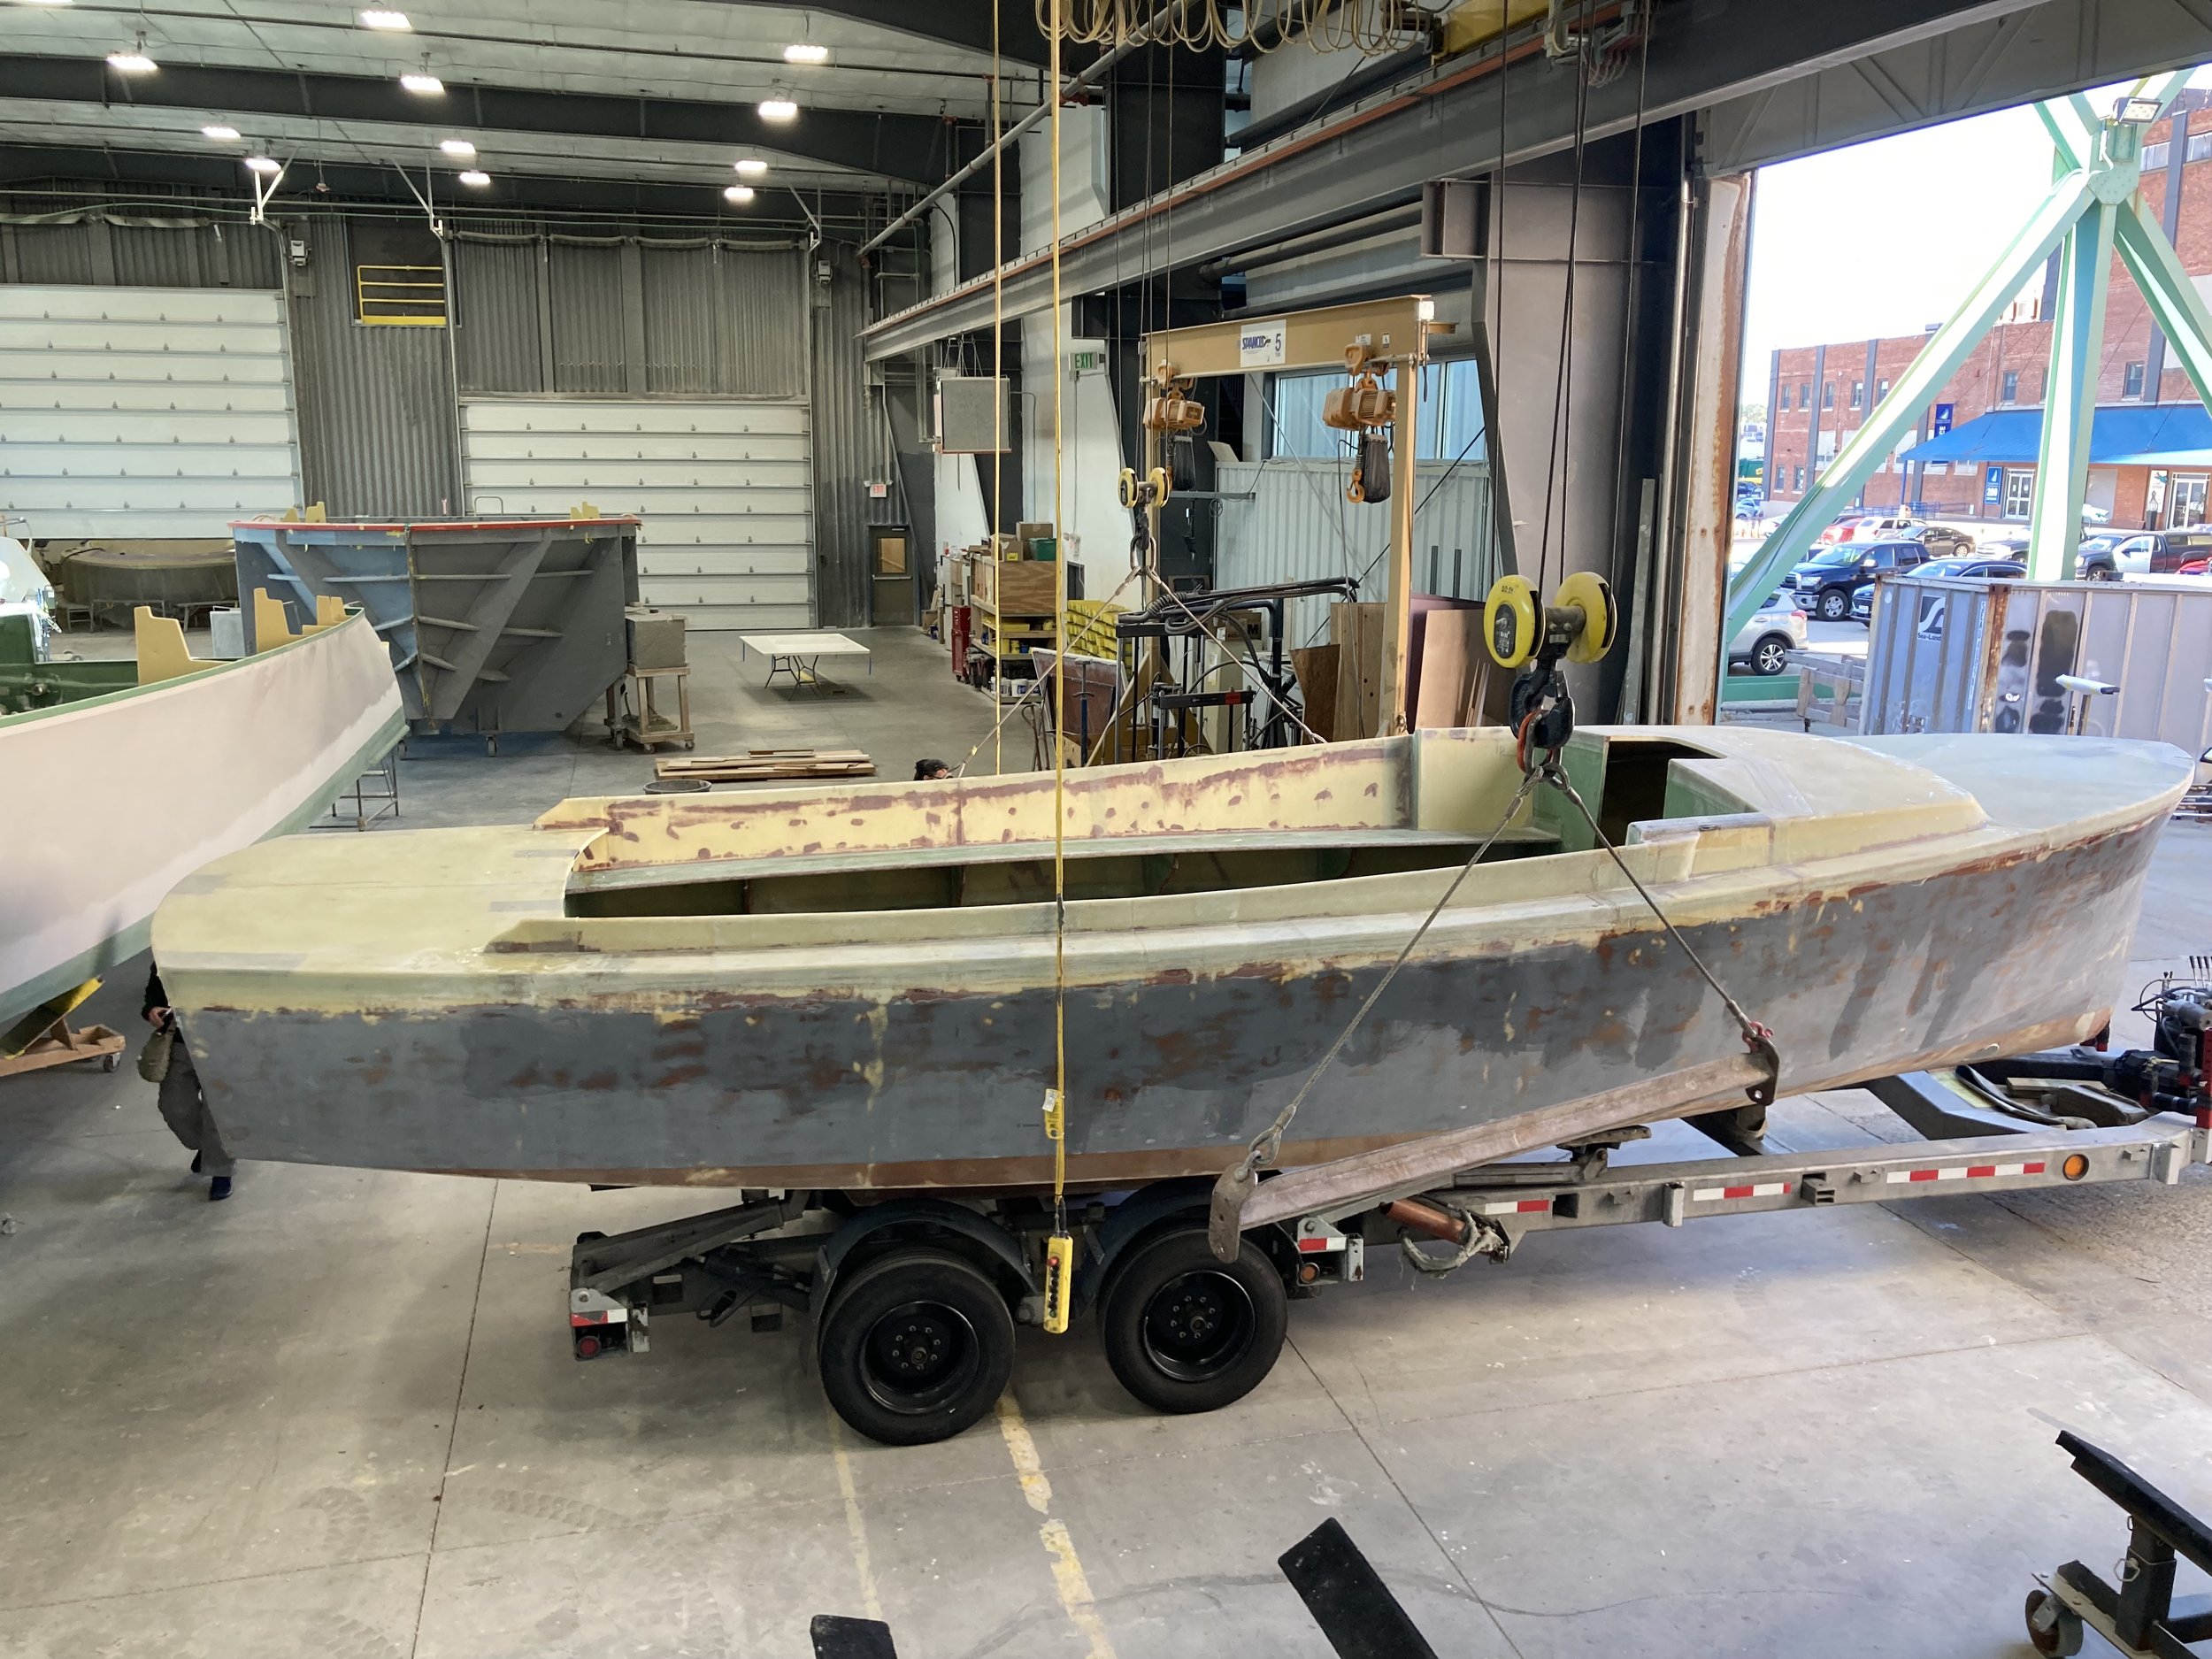    Appy VI hull being backed into the Boston Boatworks bay upon its arrival.   